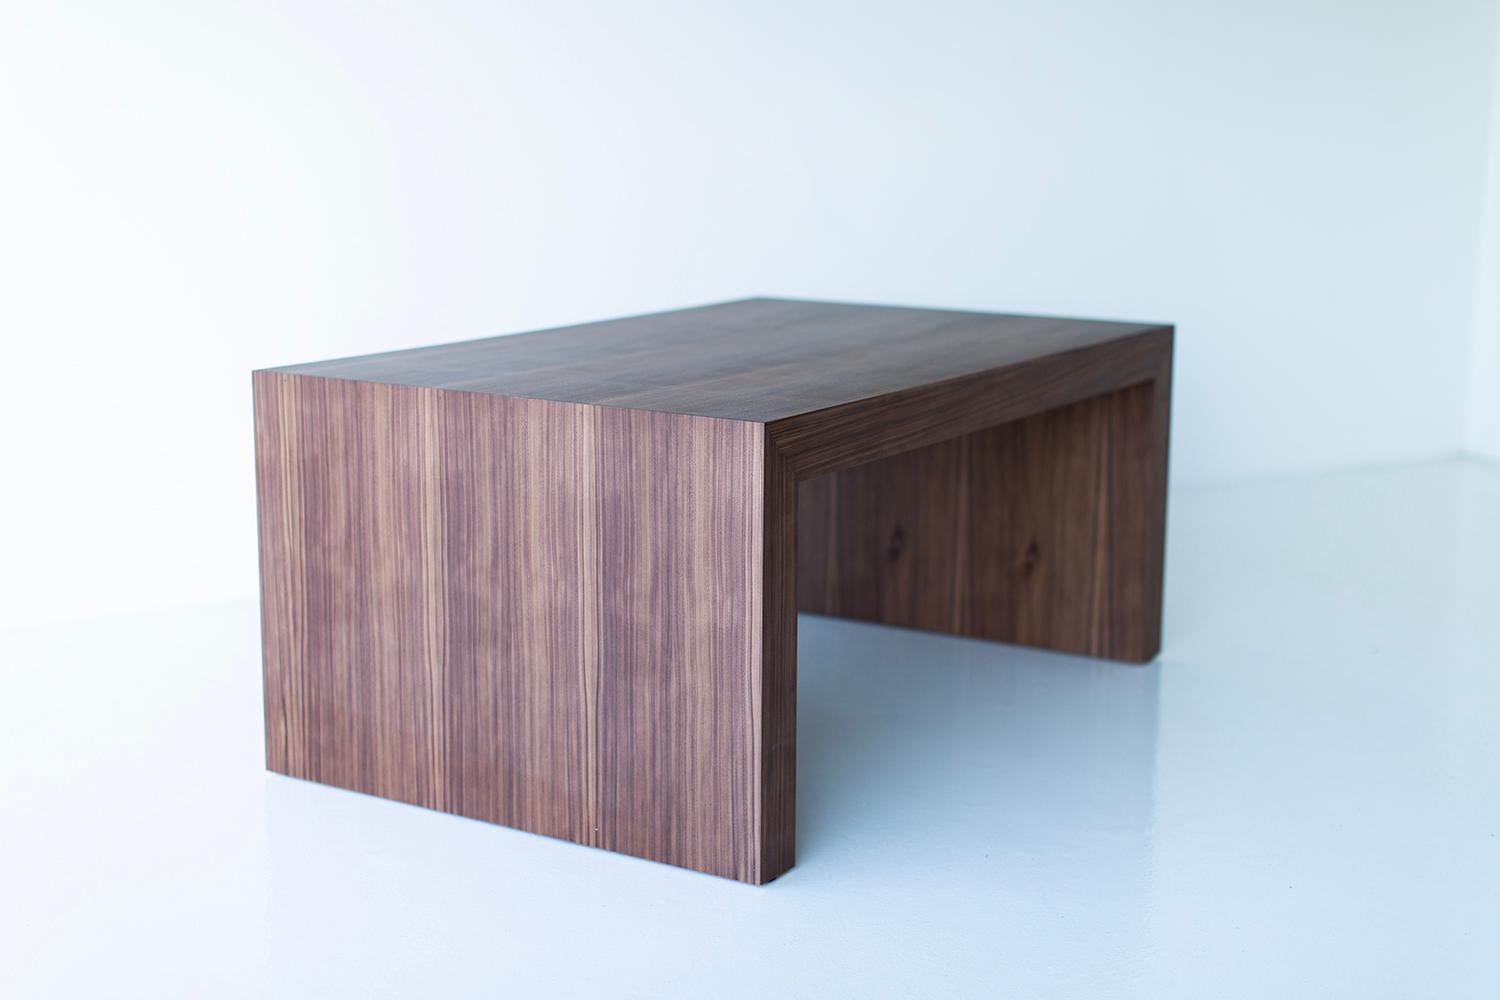 Bertu Coffee Table, Waterfall Coffee Table, Walnut

This Walnut Waterfall Coffee Table is made in the heart of Ohio with locally sourced wood. Each table is hand-made with mitered corners from walnut veneer and finished with a beautiful matte